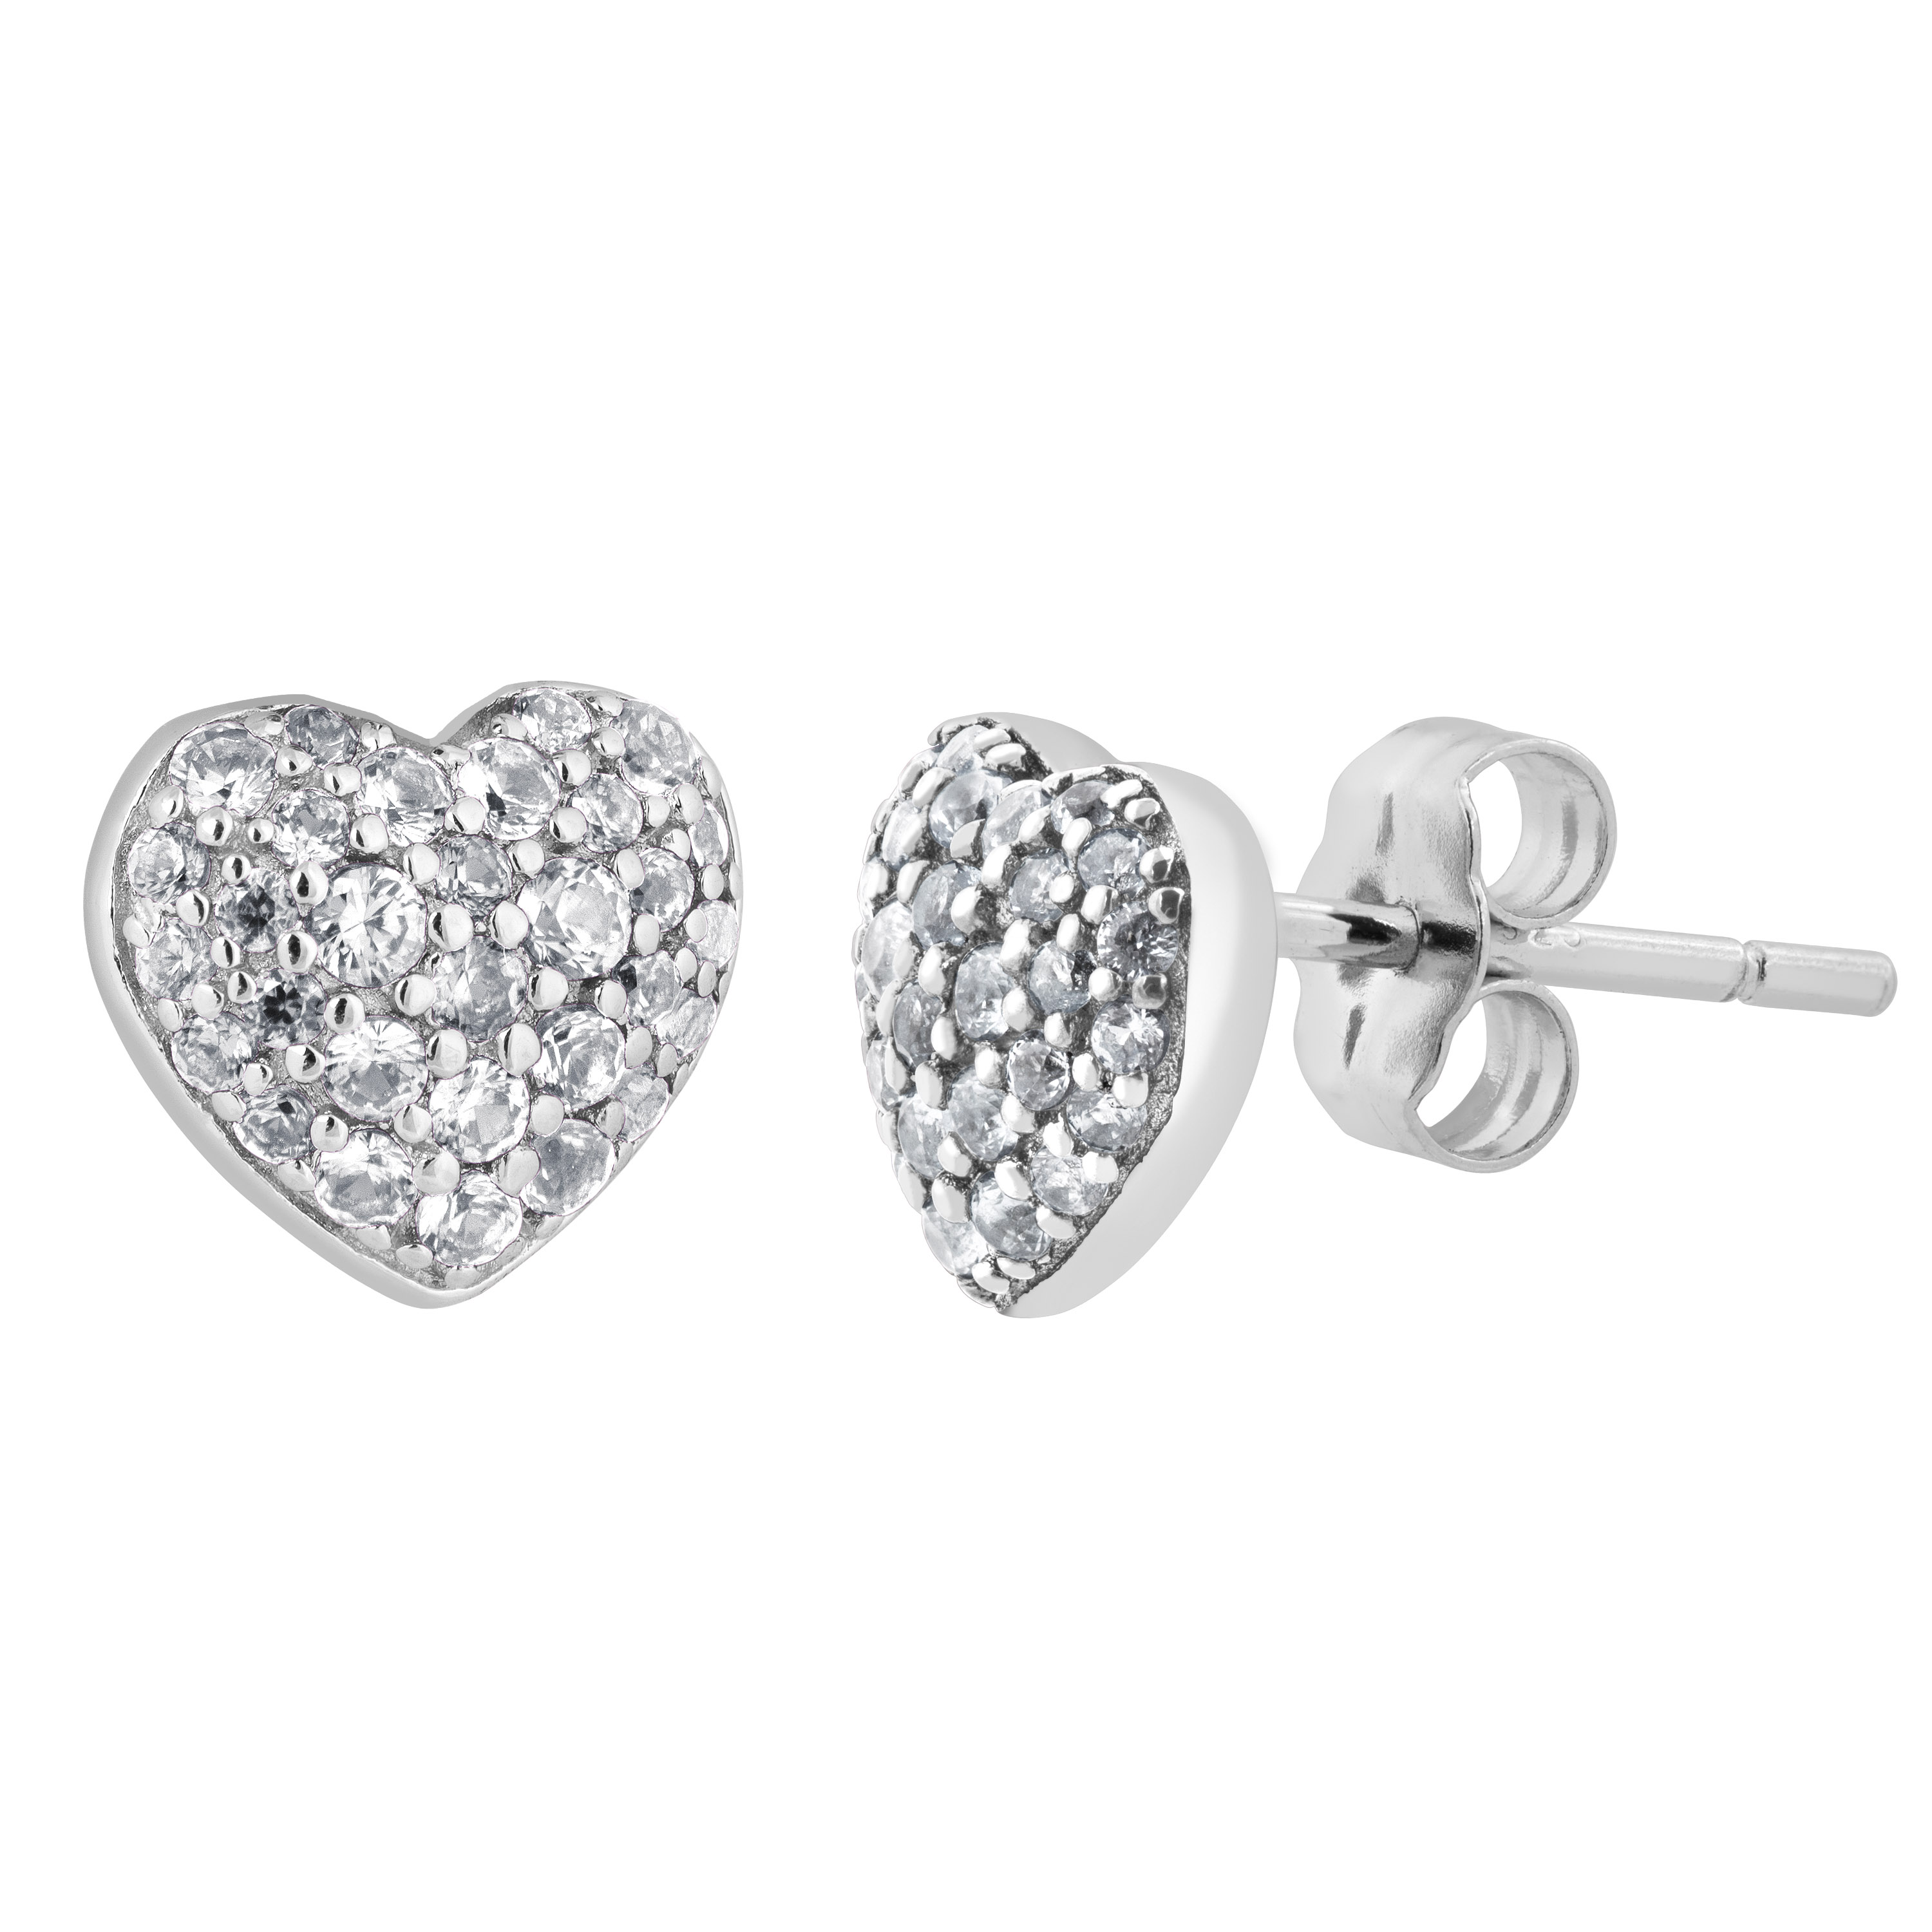 CZ Earrings, Rhodium Plated Sterling Silver